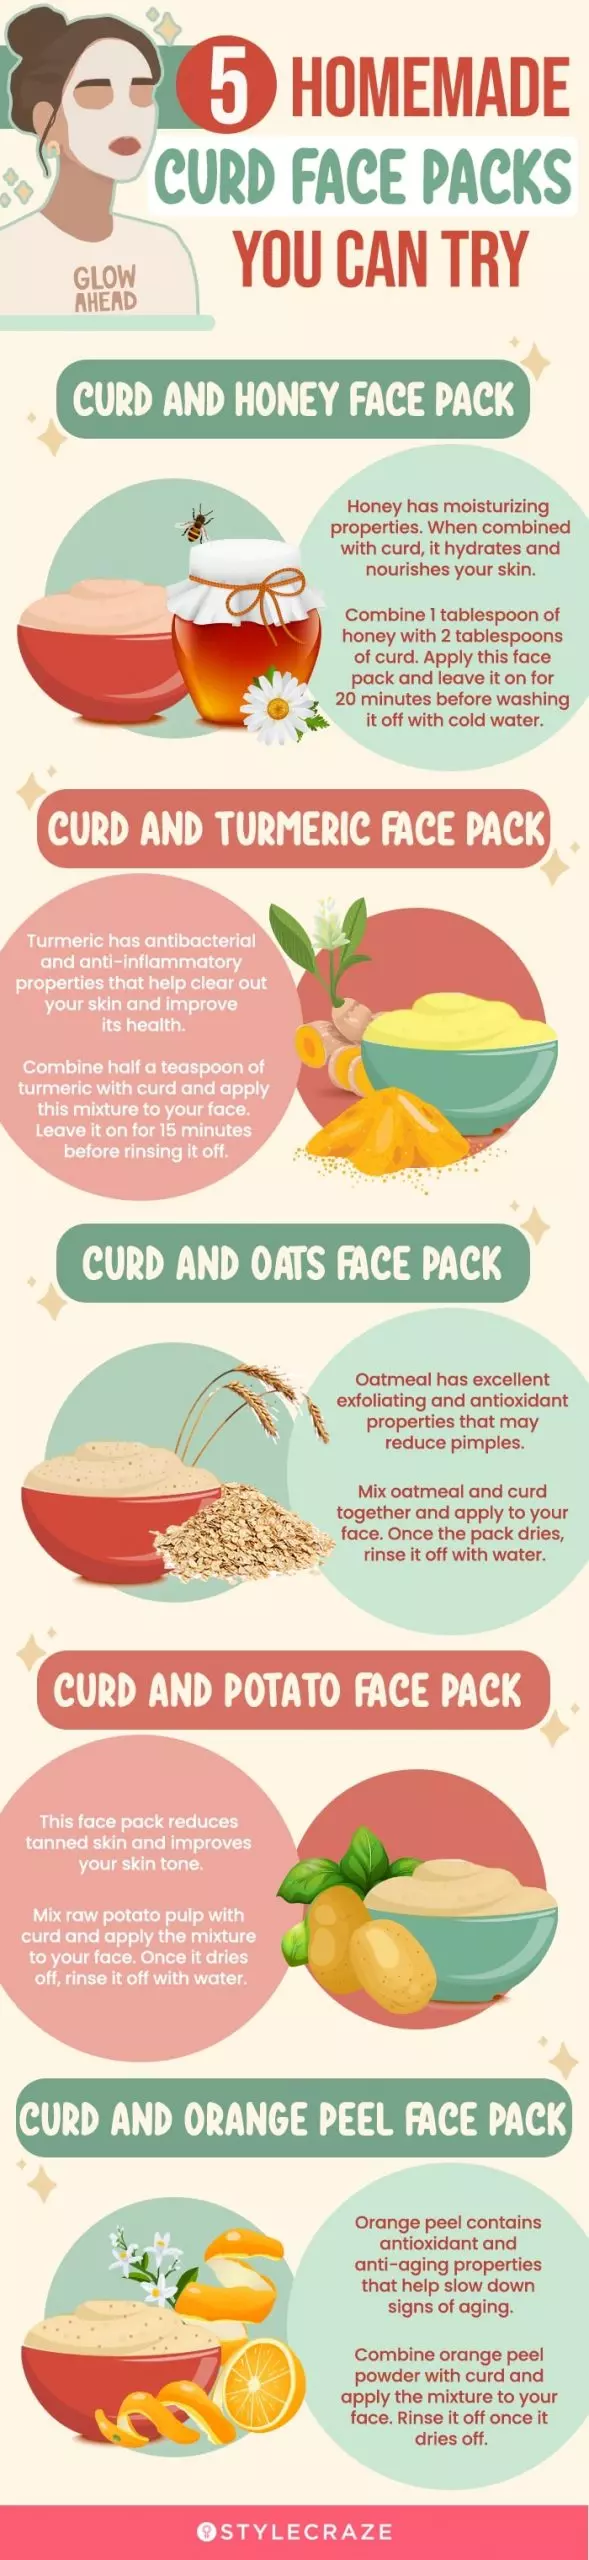 5 homemade curd face packs you can try (infographic)